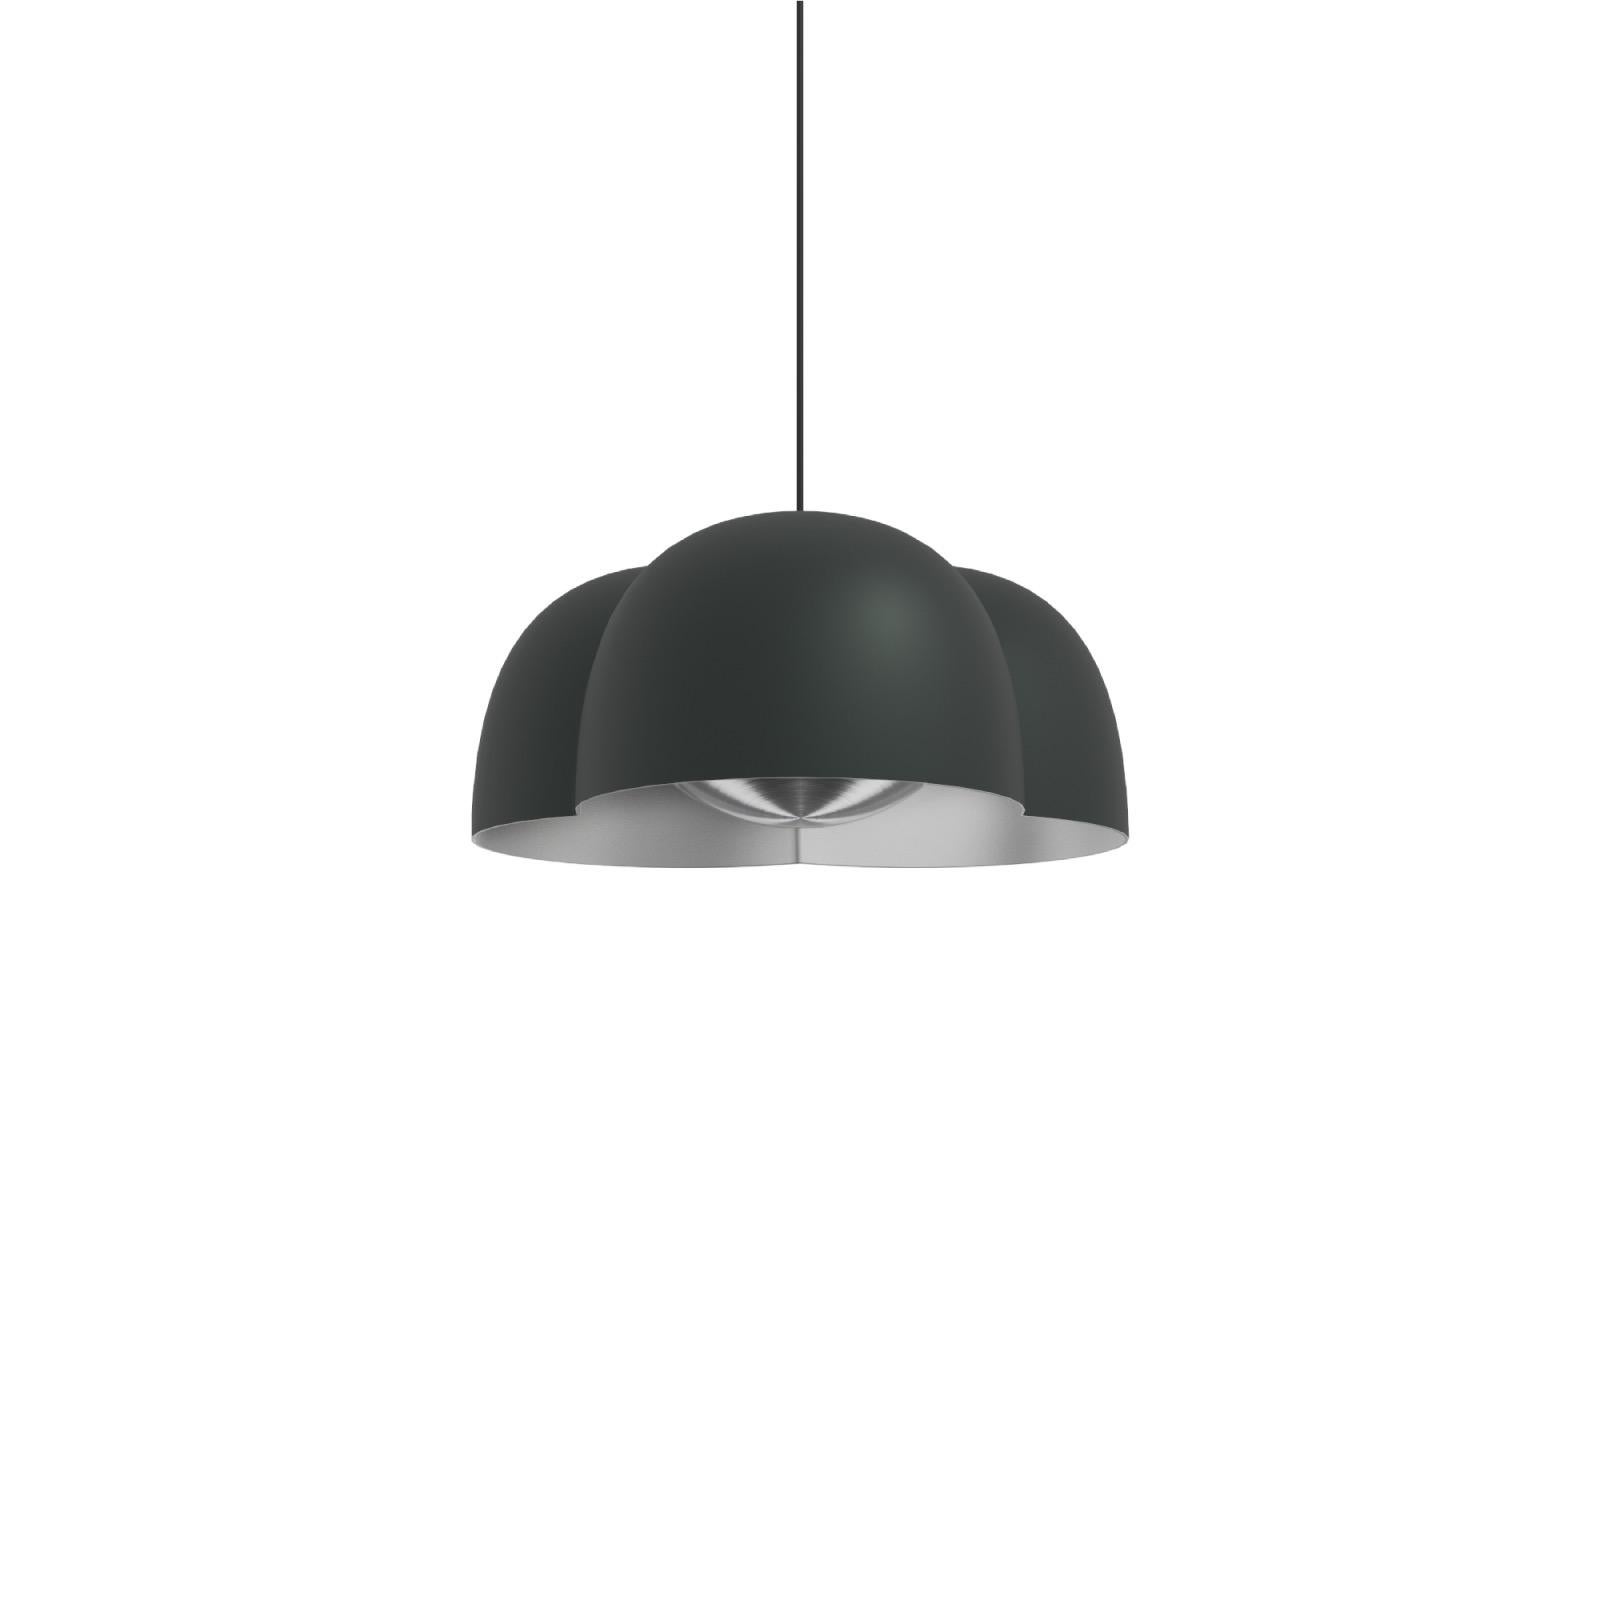 Cotton Pendant lamp by Sebastian Herkner x AGO Lighting
Deep Green
Materials: Aluminum, Stainless
Light Source: Integrated LED (SMD), DC
Watt. 12W
Color temp. 2700 / 3000K
Cable Length: 3M
Available colors:
Charcoal, chocolate, deep